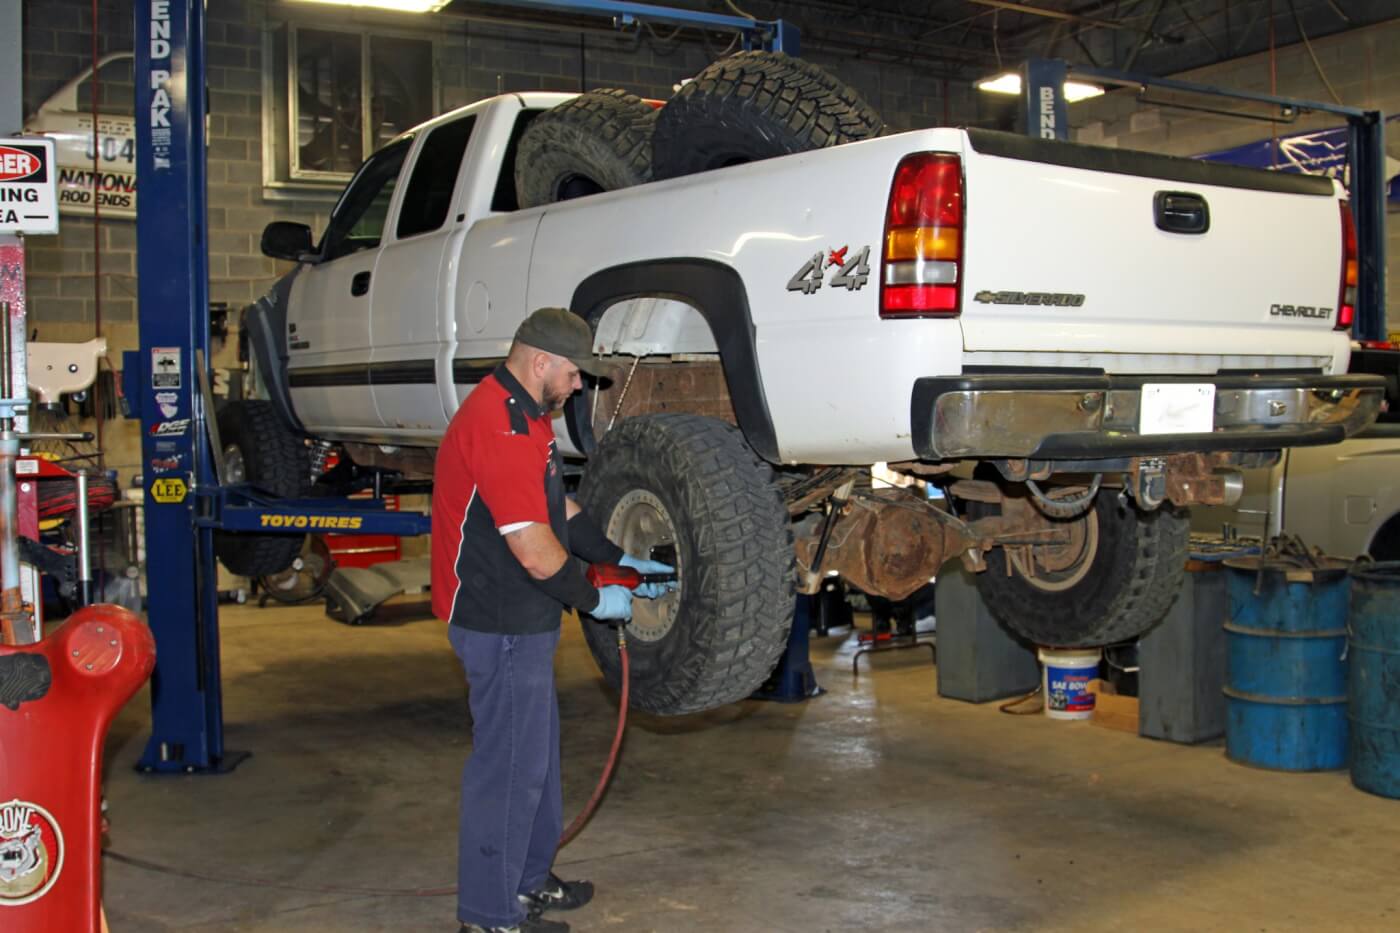 1. To start the Ultimate Rear Axle Build Jason Nelson puts the big Duramax truck on one of the twin post lifts in the RPM Offroad service bay and then removes the rear wheels.